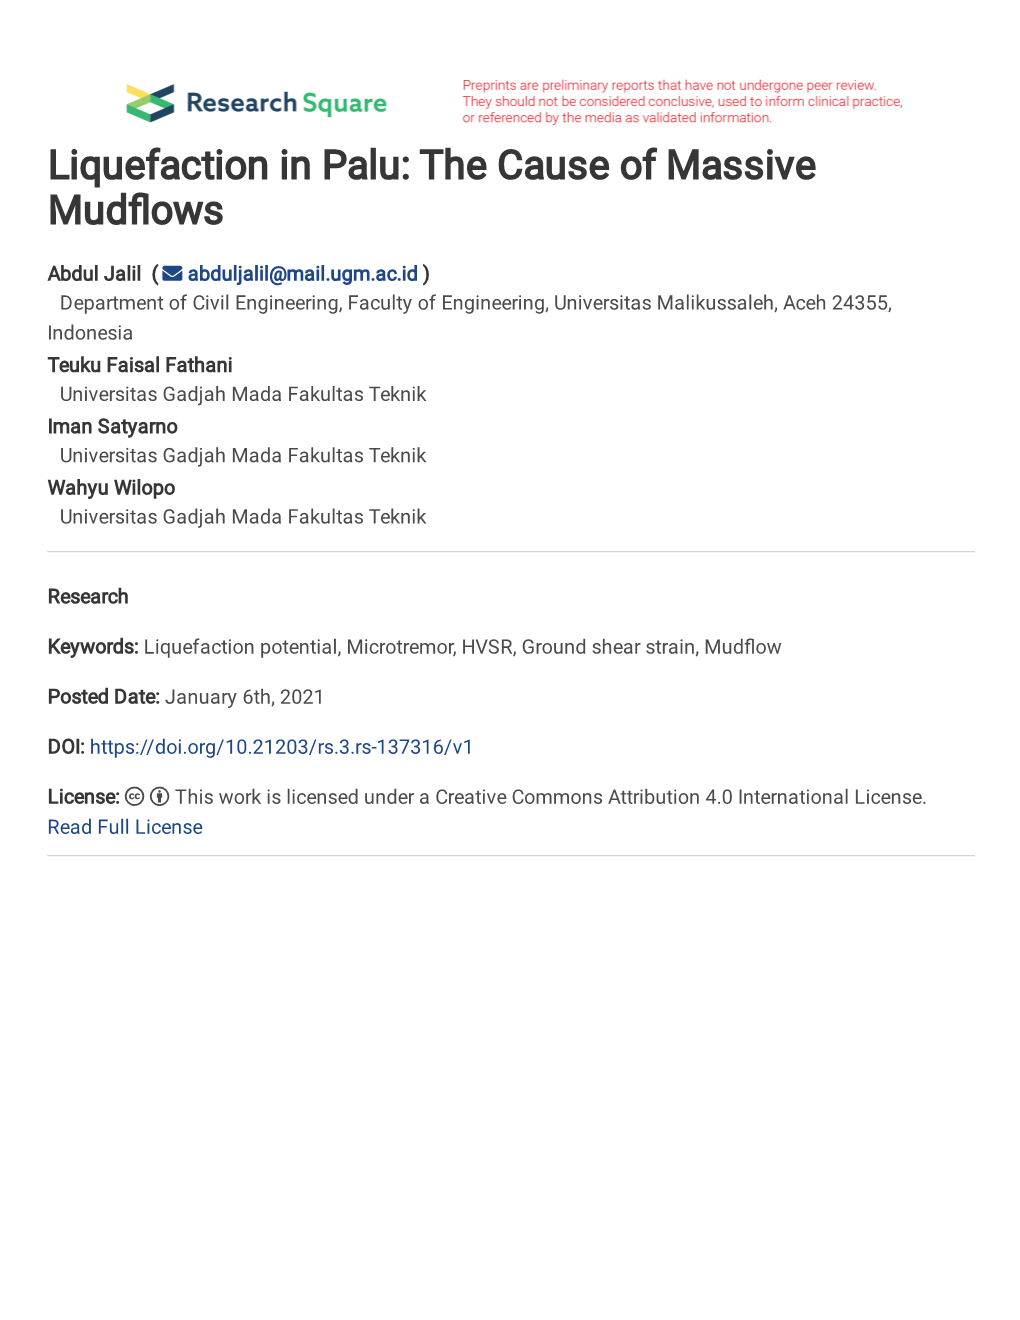 Liquefaction in Palu: the Cause of Massive Mud�Ows